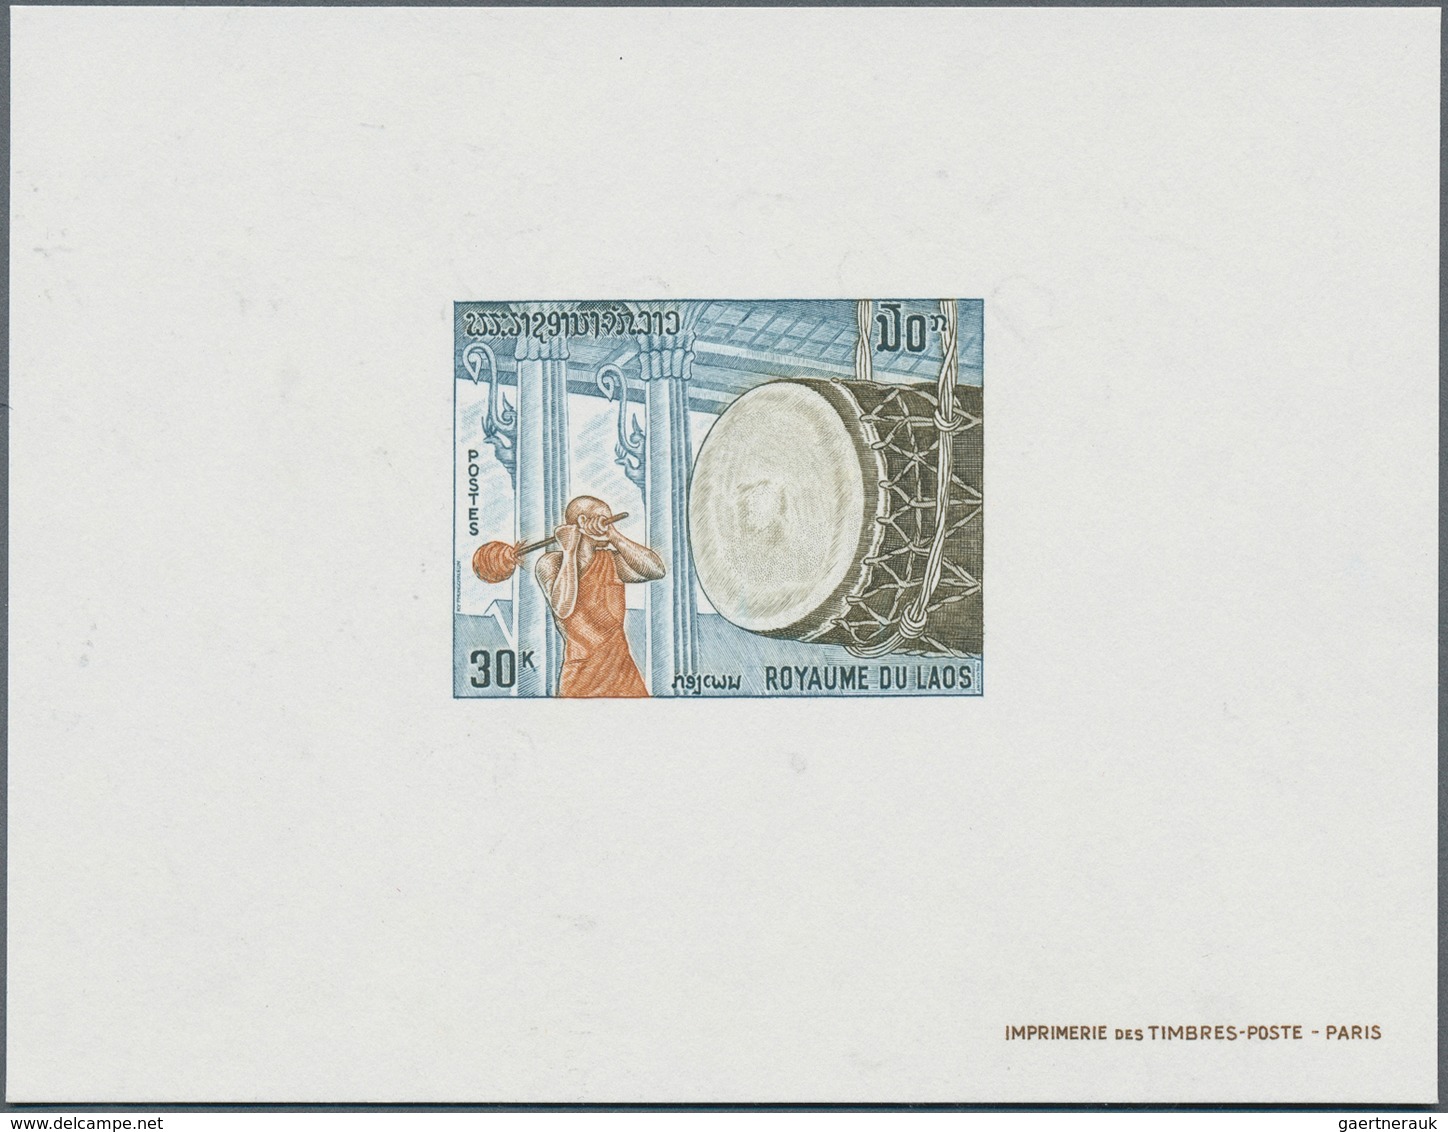 23405 Laos: 1964/1974 (approx). Interesting proof lot containing 31 Eprueves d'atelier and 35 miniature sh